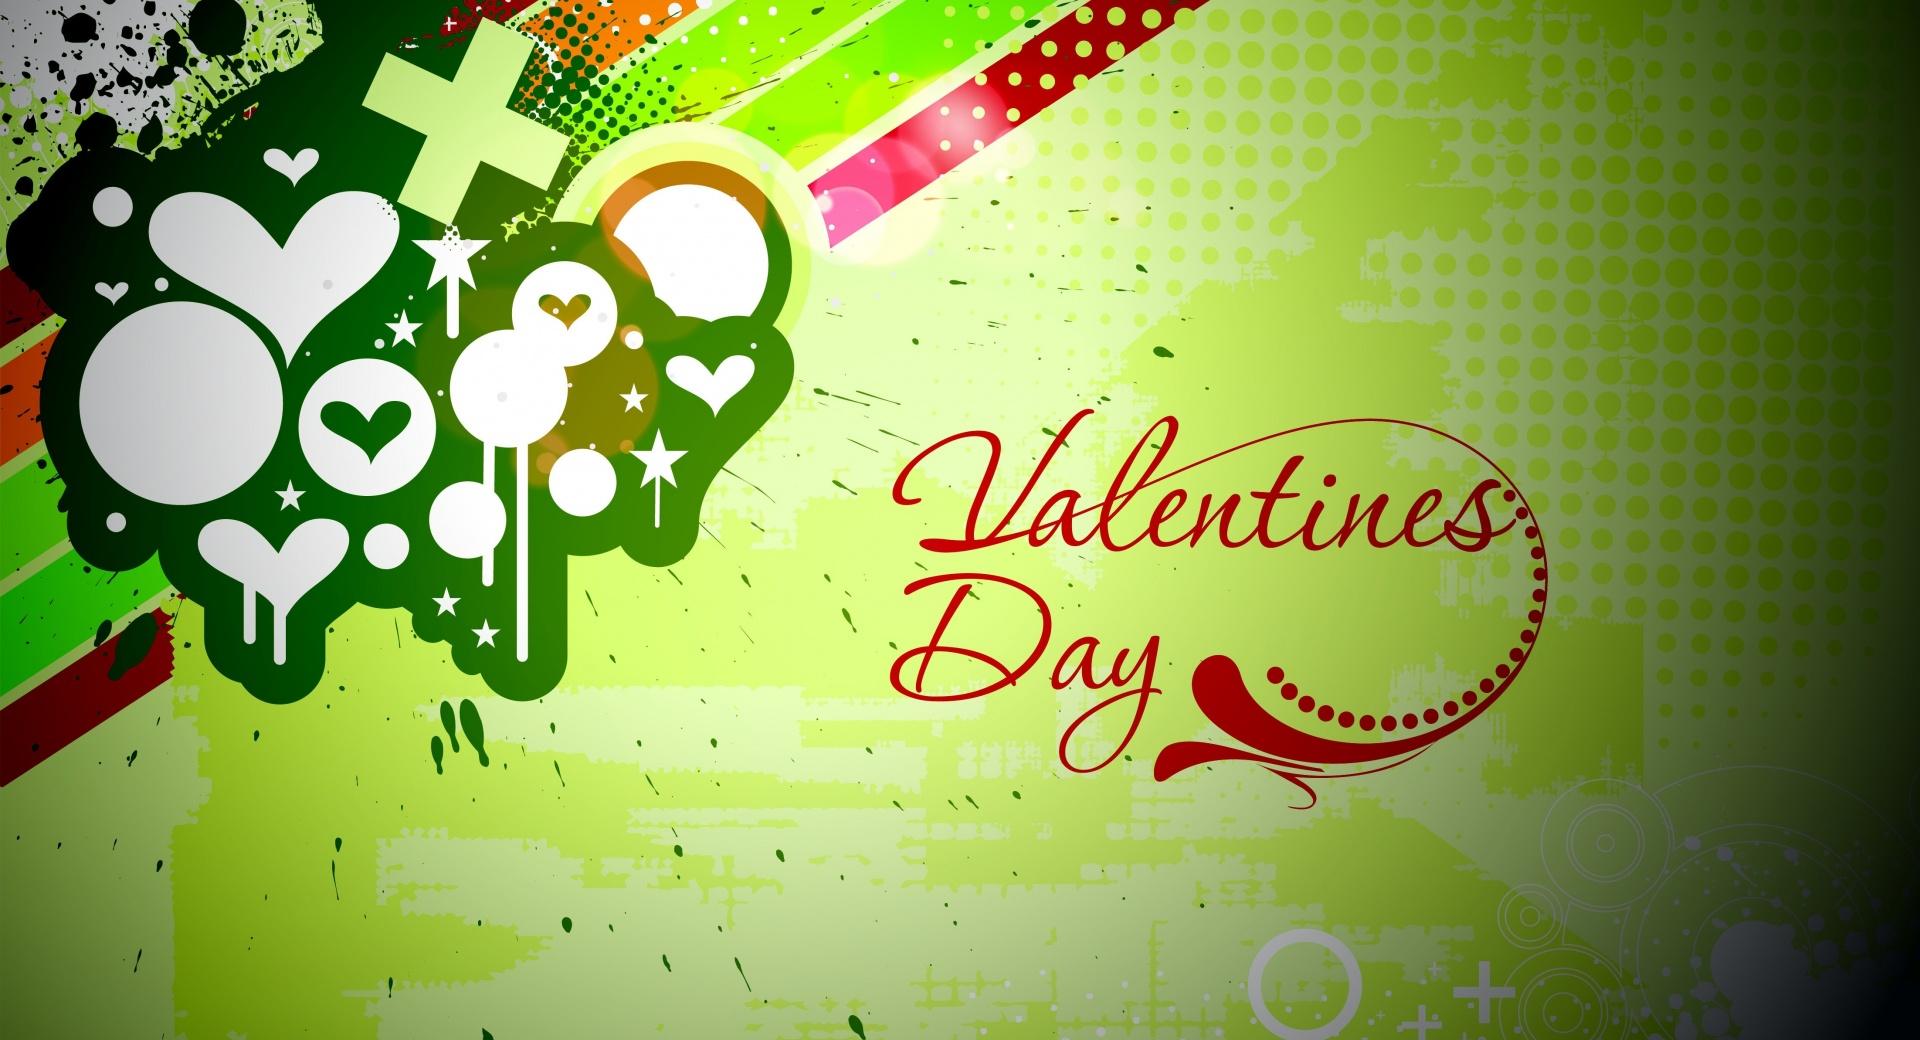 Happy Valentines Day 2012 wallpapers HD quality